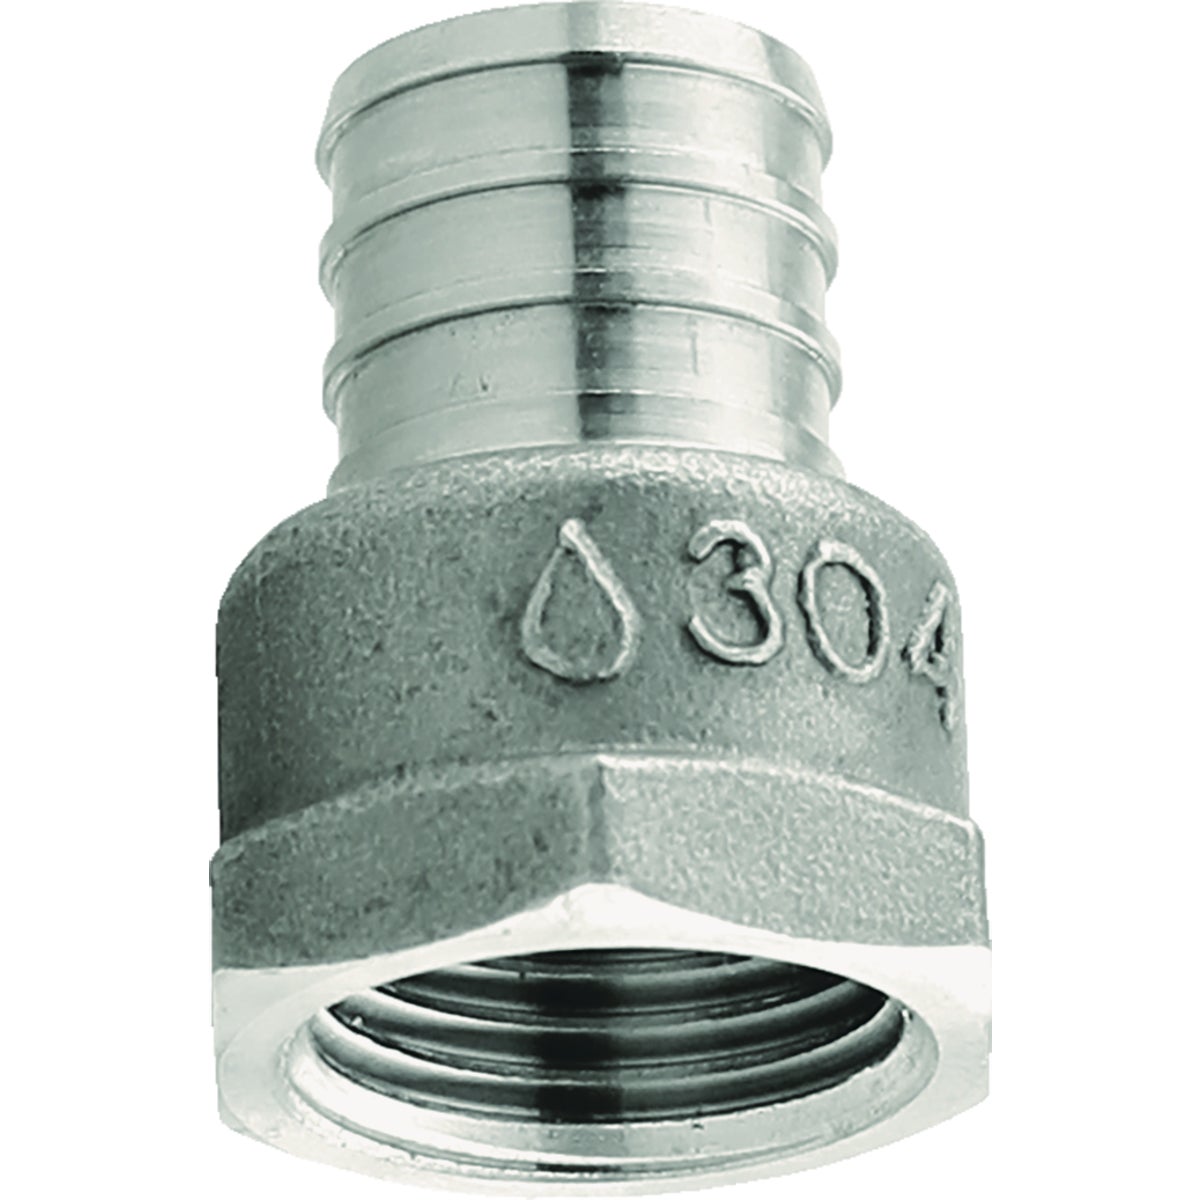 Plumbeez 3/4 In. x 1/2 In. FPT Stainless Steel PEX Adapter